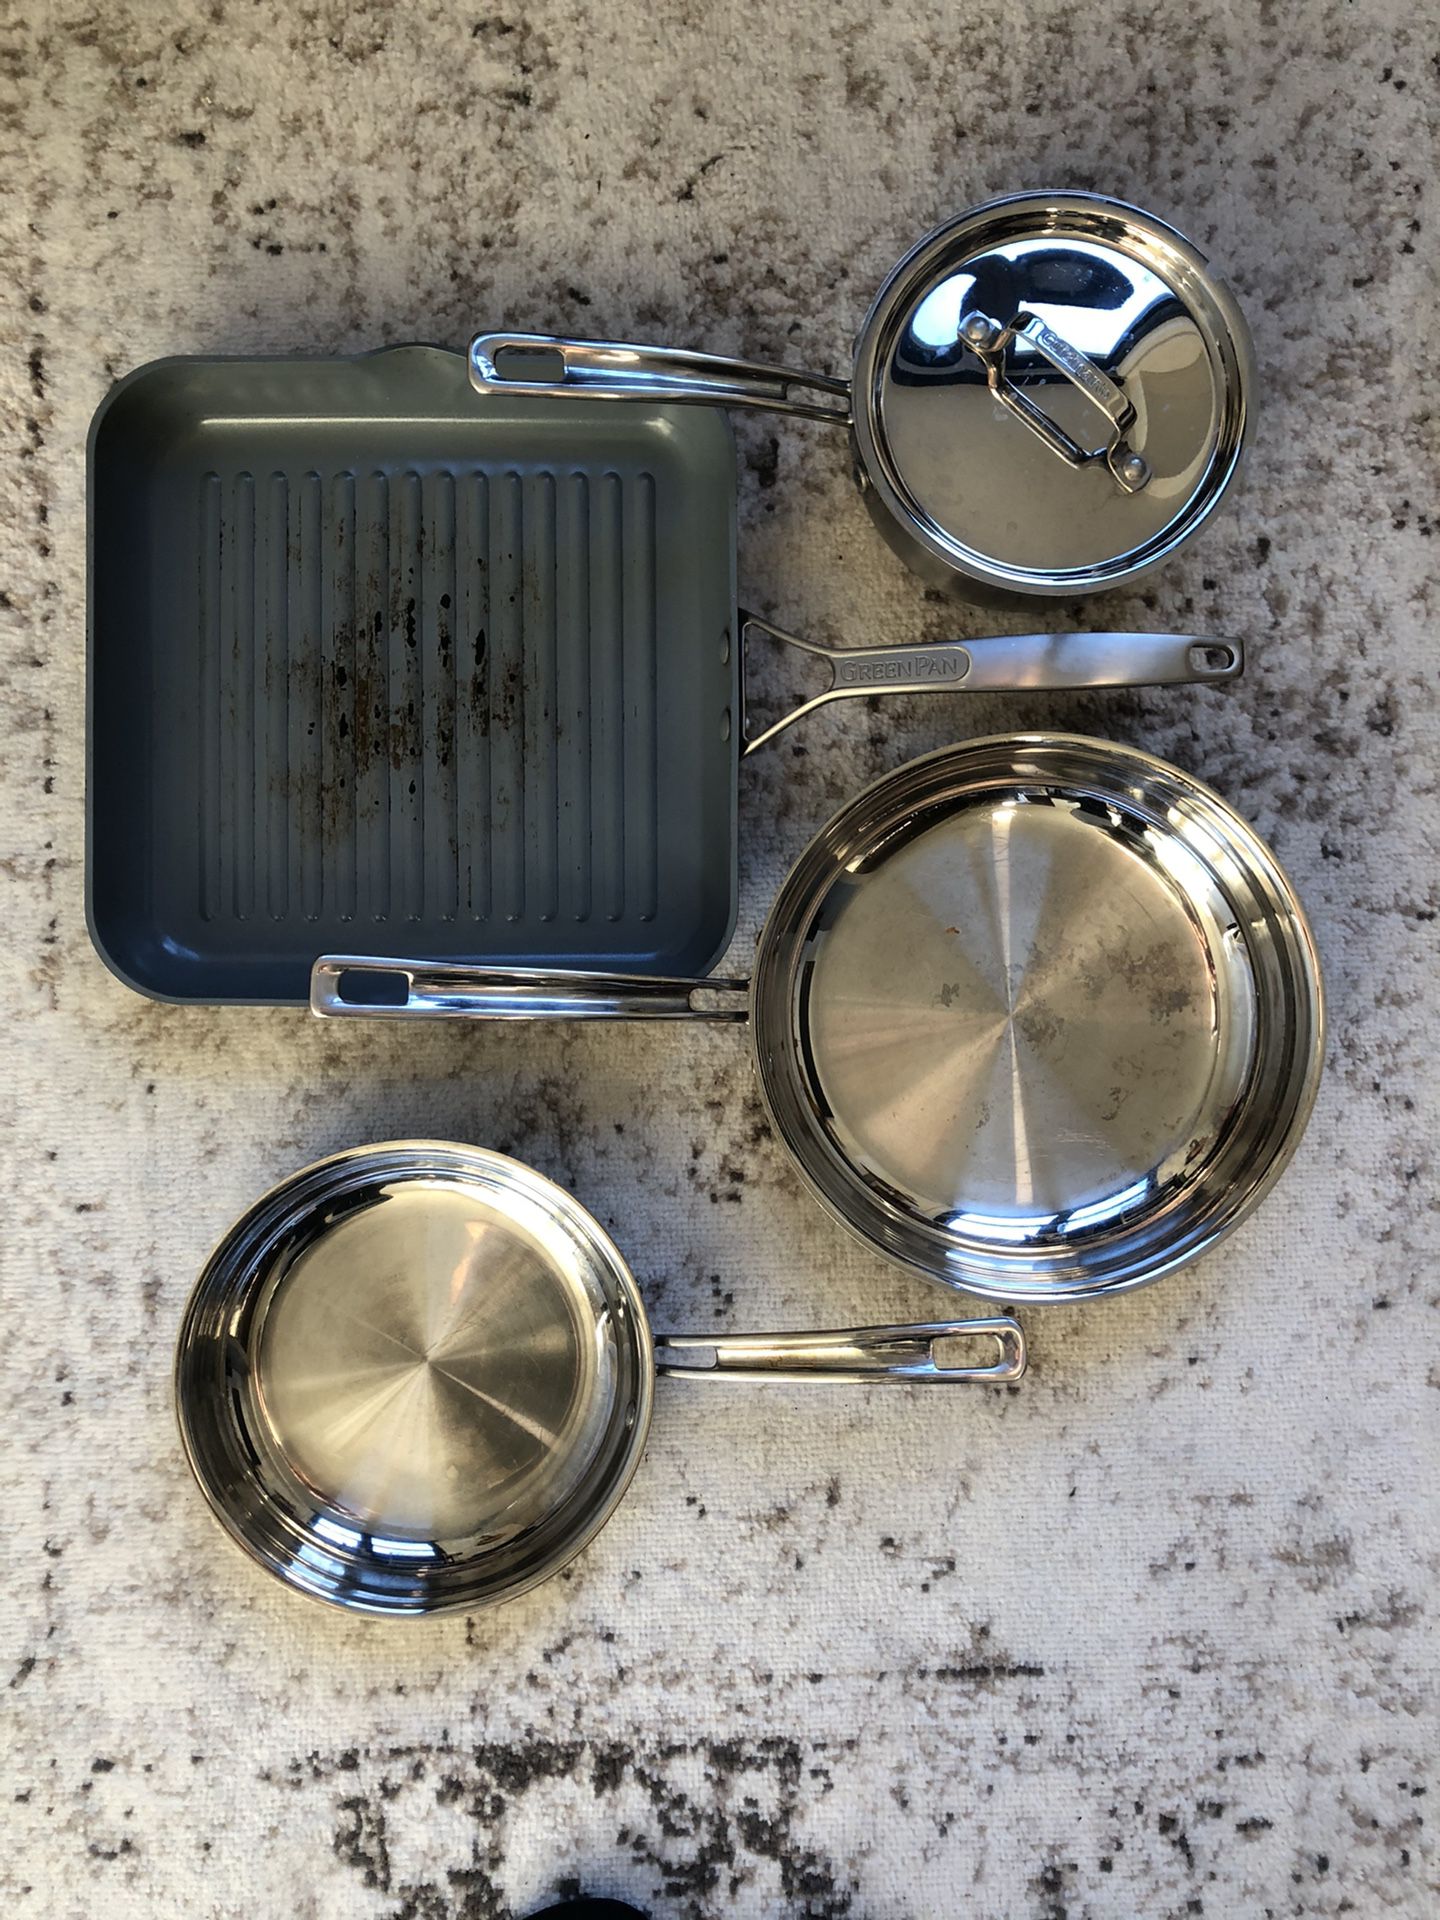 Cuisineart and greenpan pots and pans